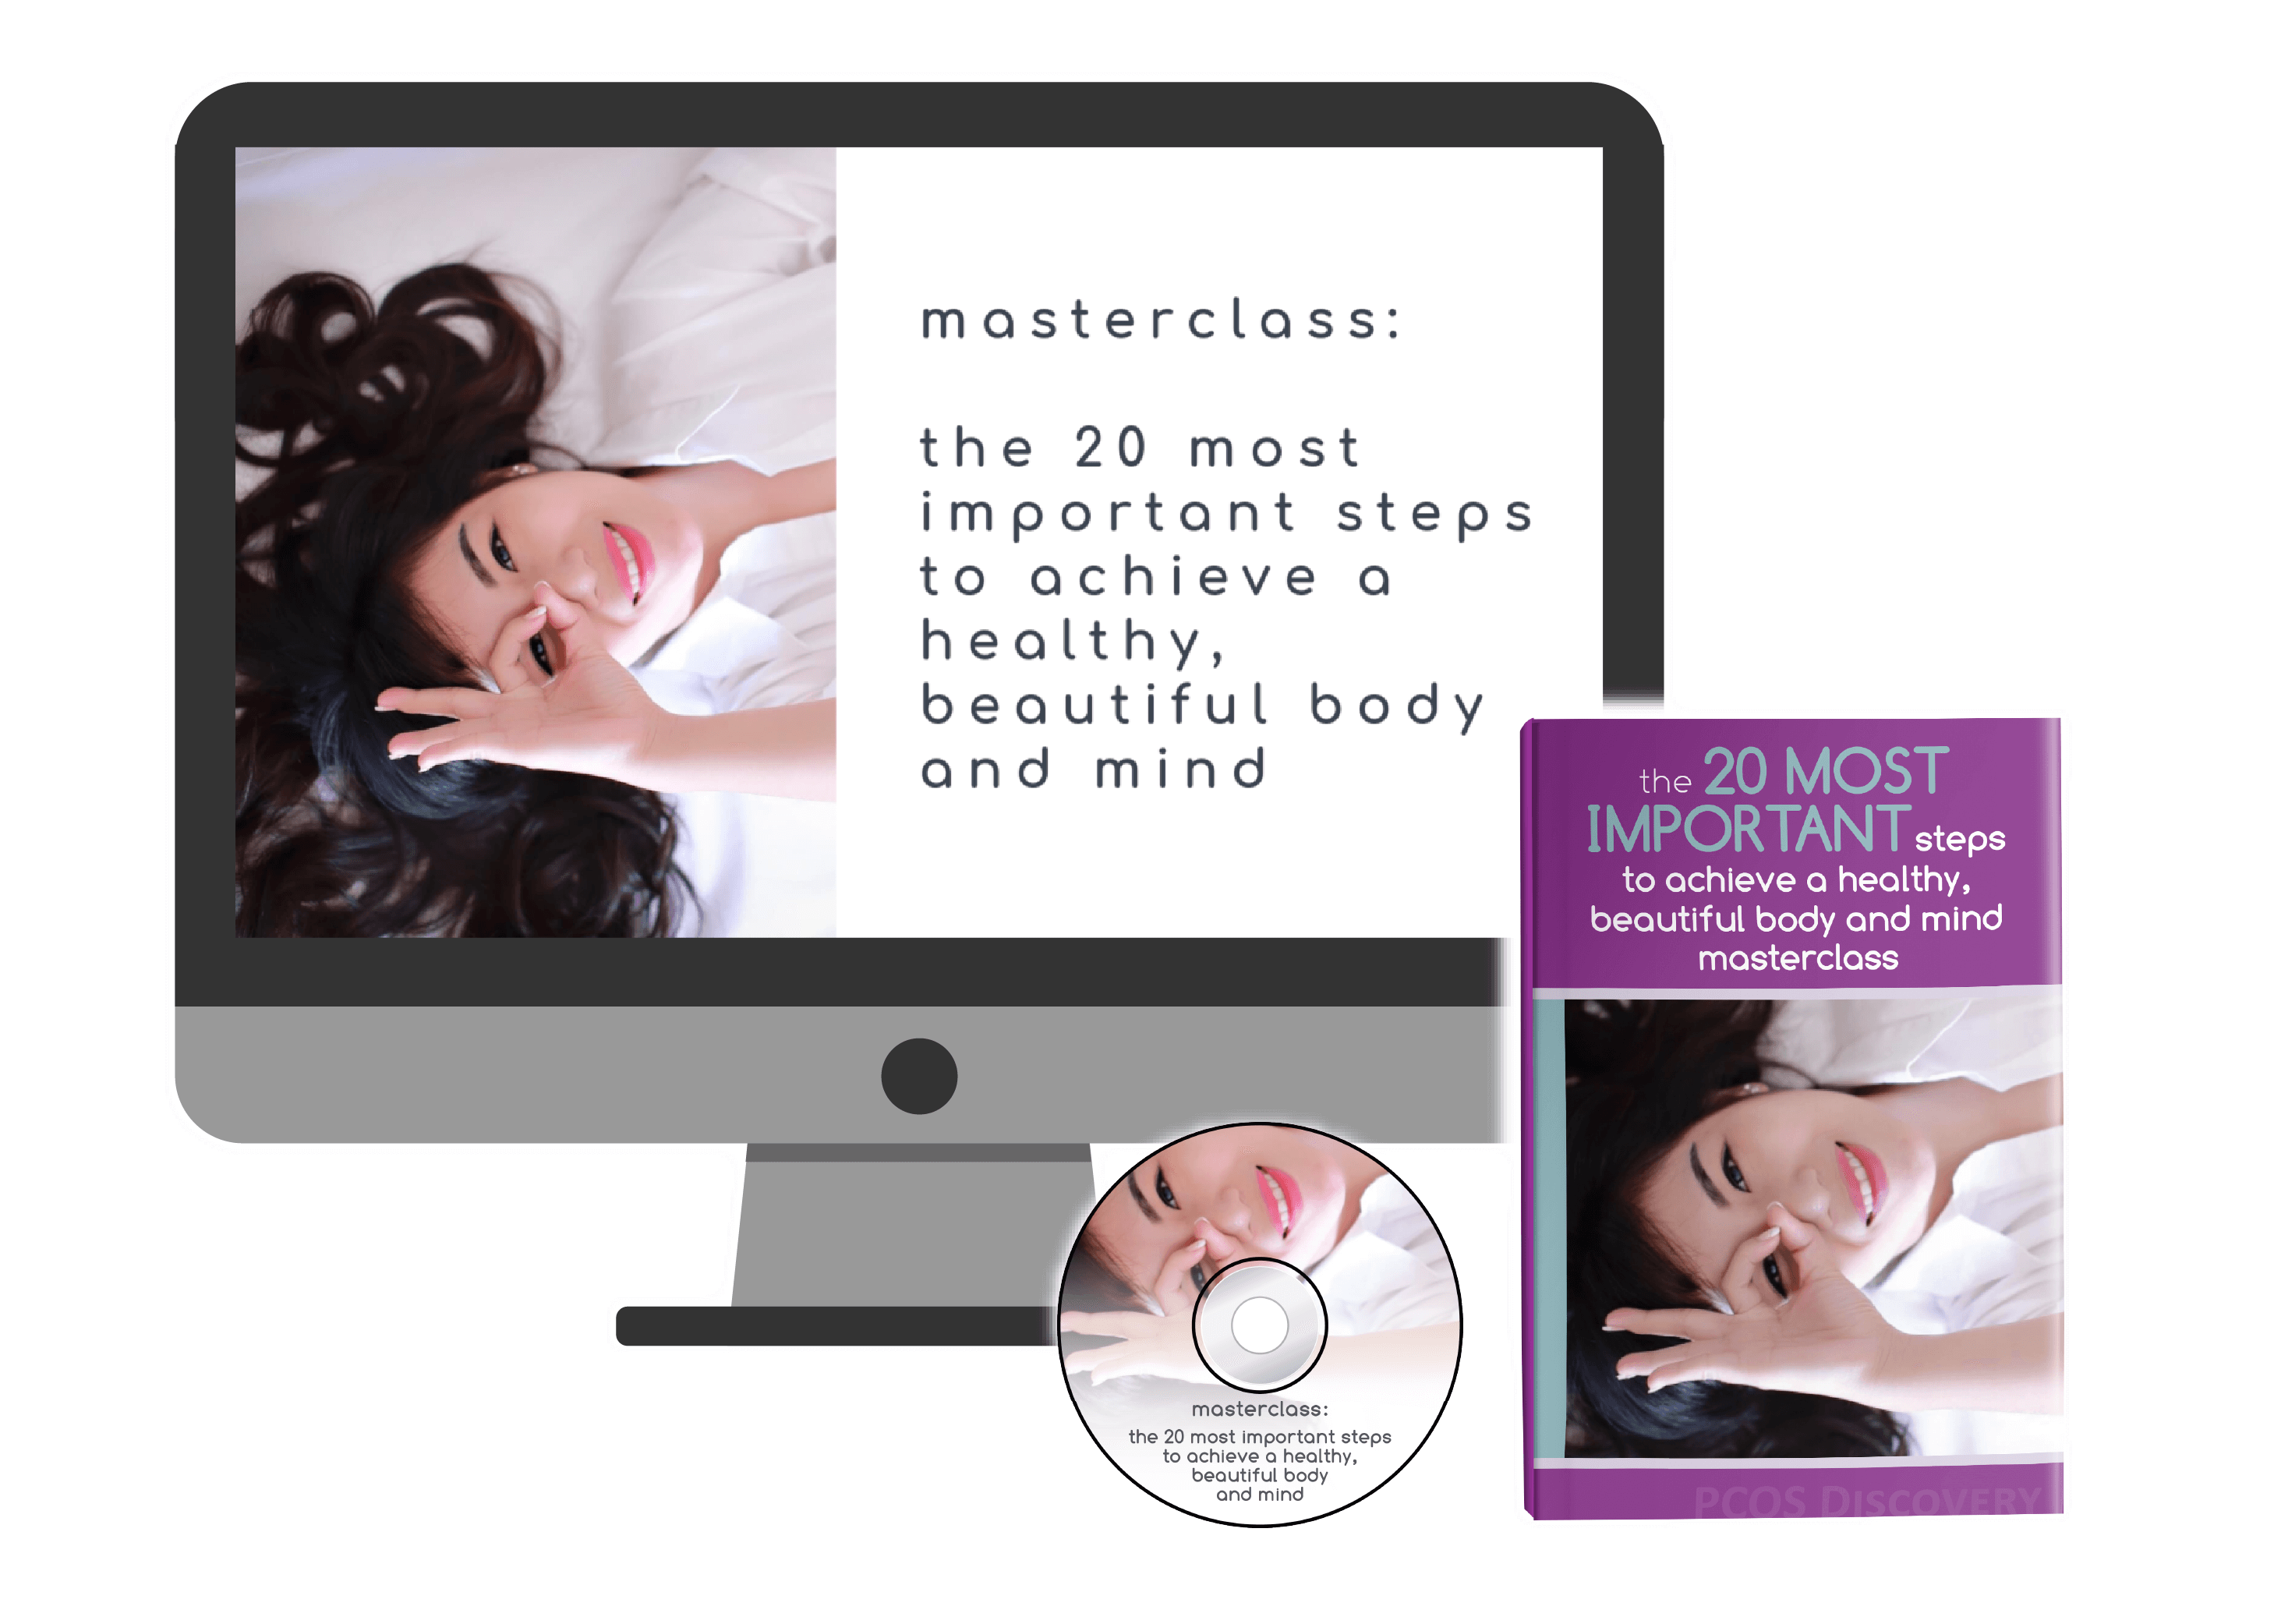 The 20 Most Important Steps To Achieve a Healthy & Beautiful Body and Mind masterclass